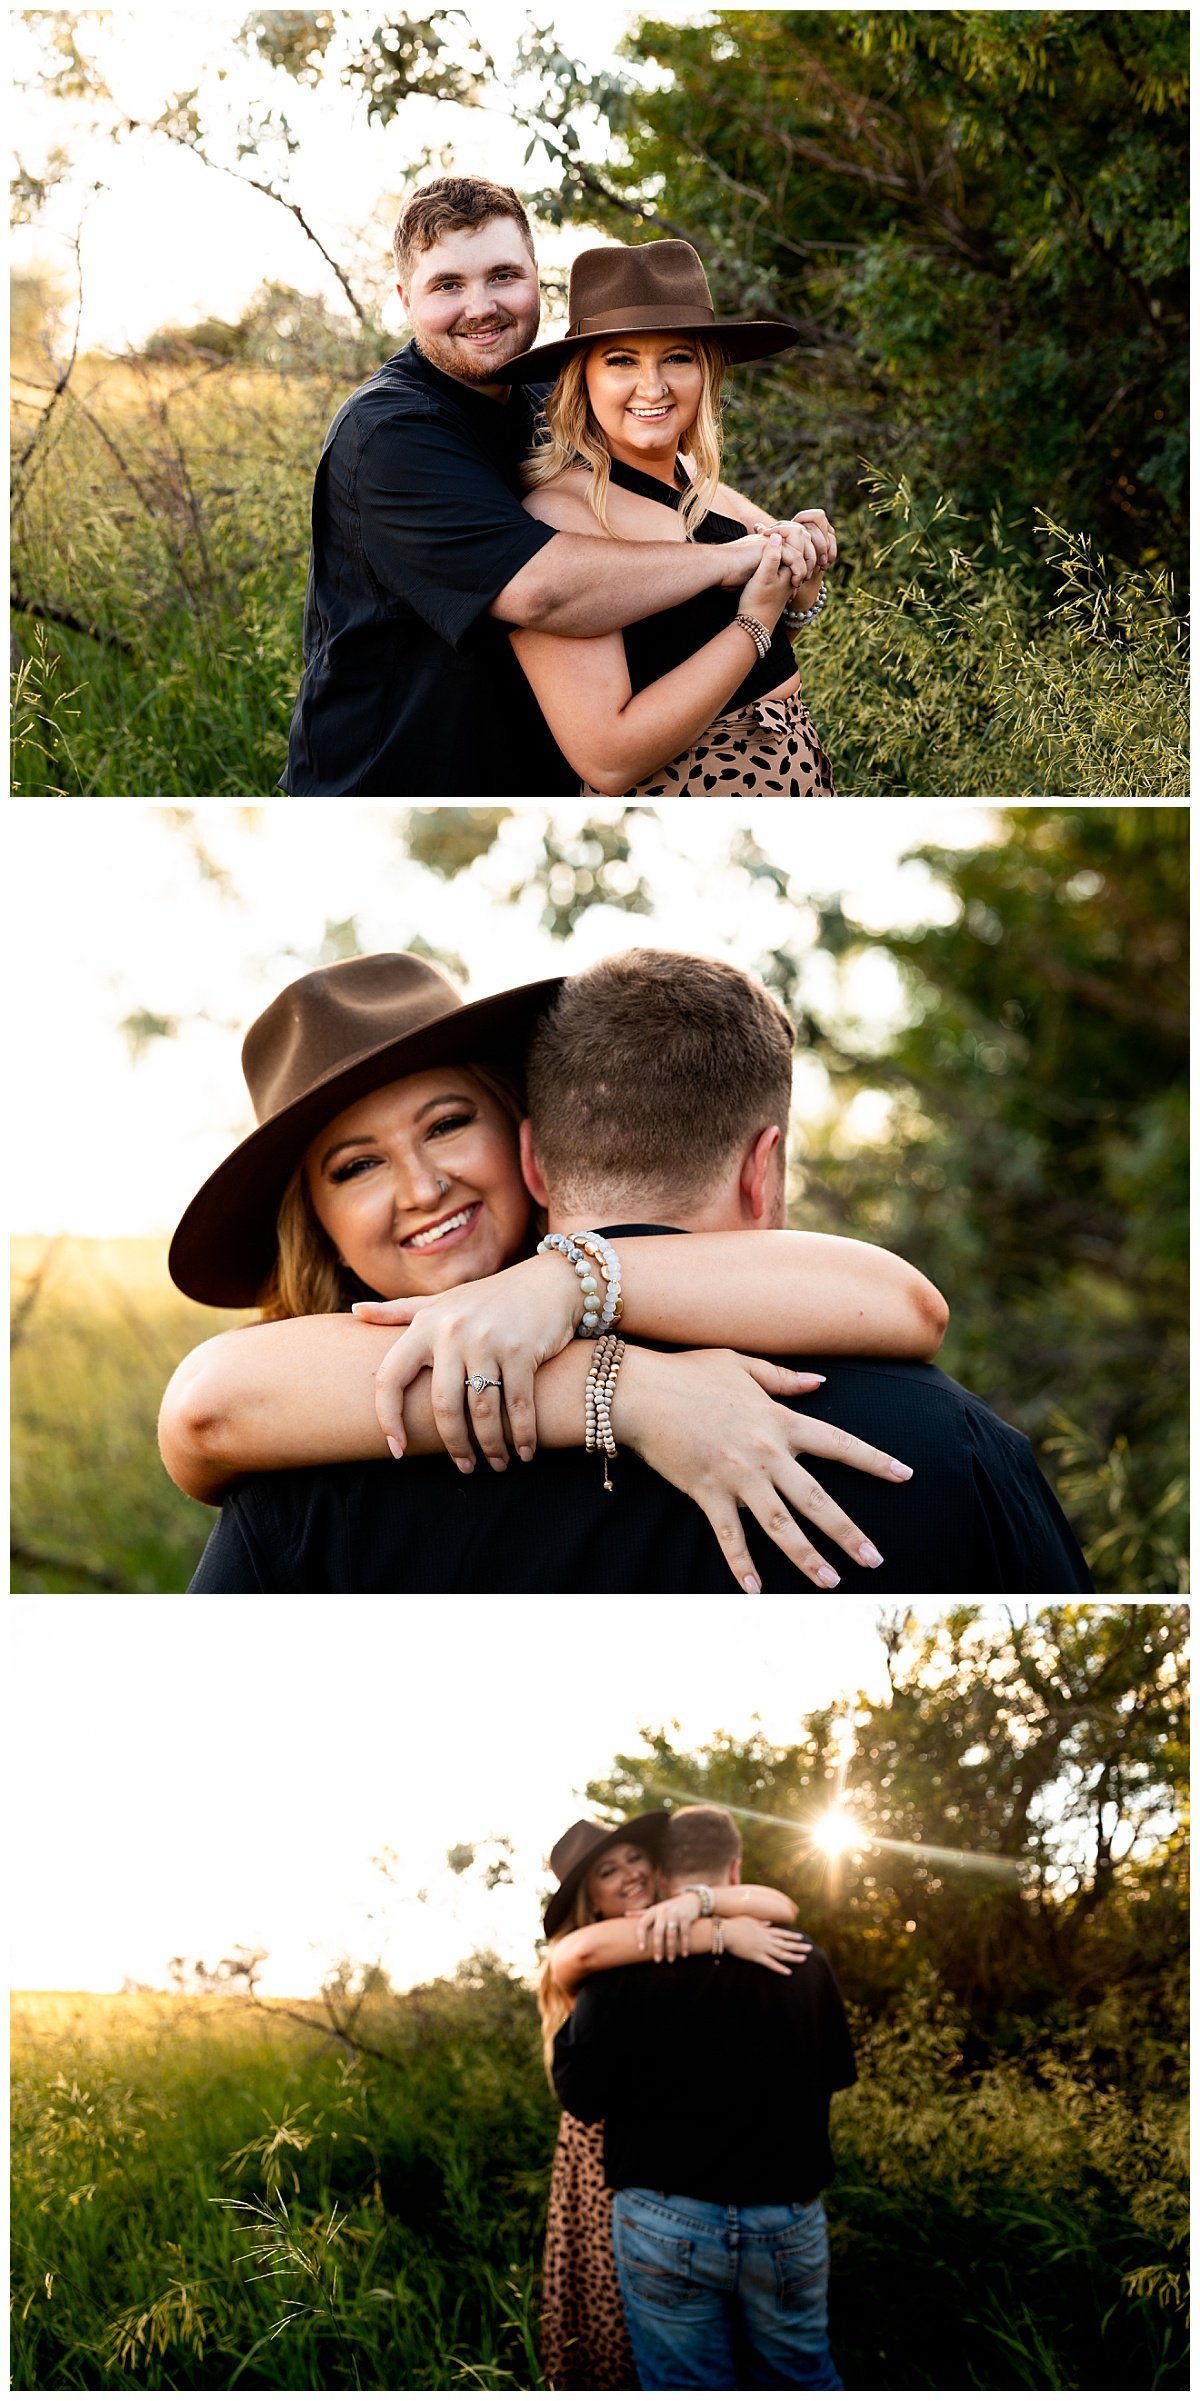 A young woman showcases her new diamond engagement ring during a North Dakota engagement session at golden hour on her fiance's family farm.